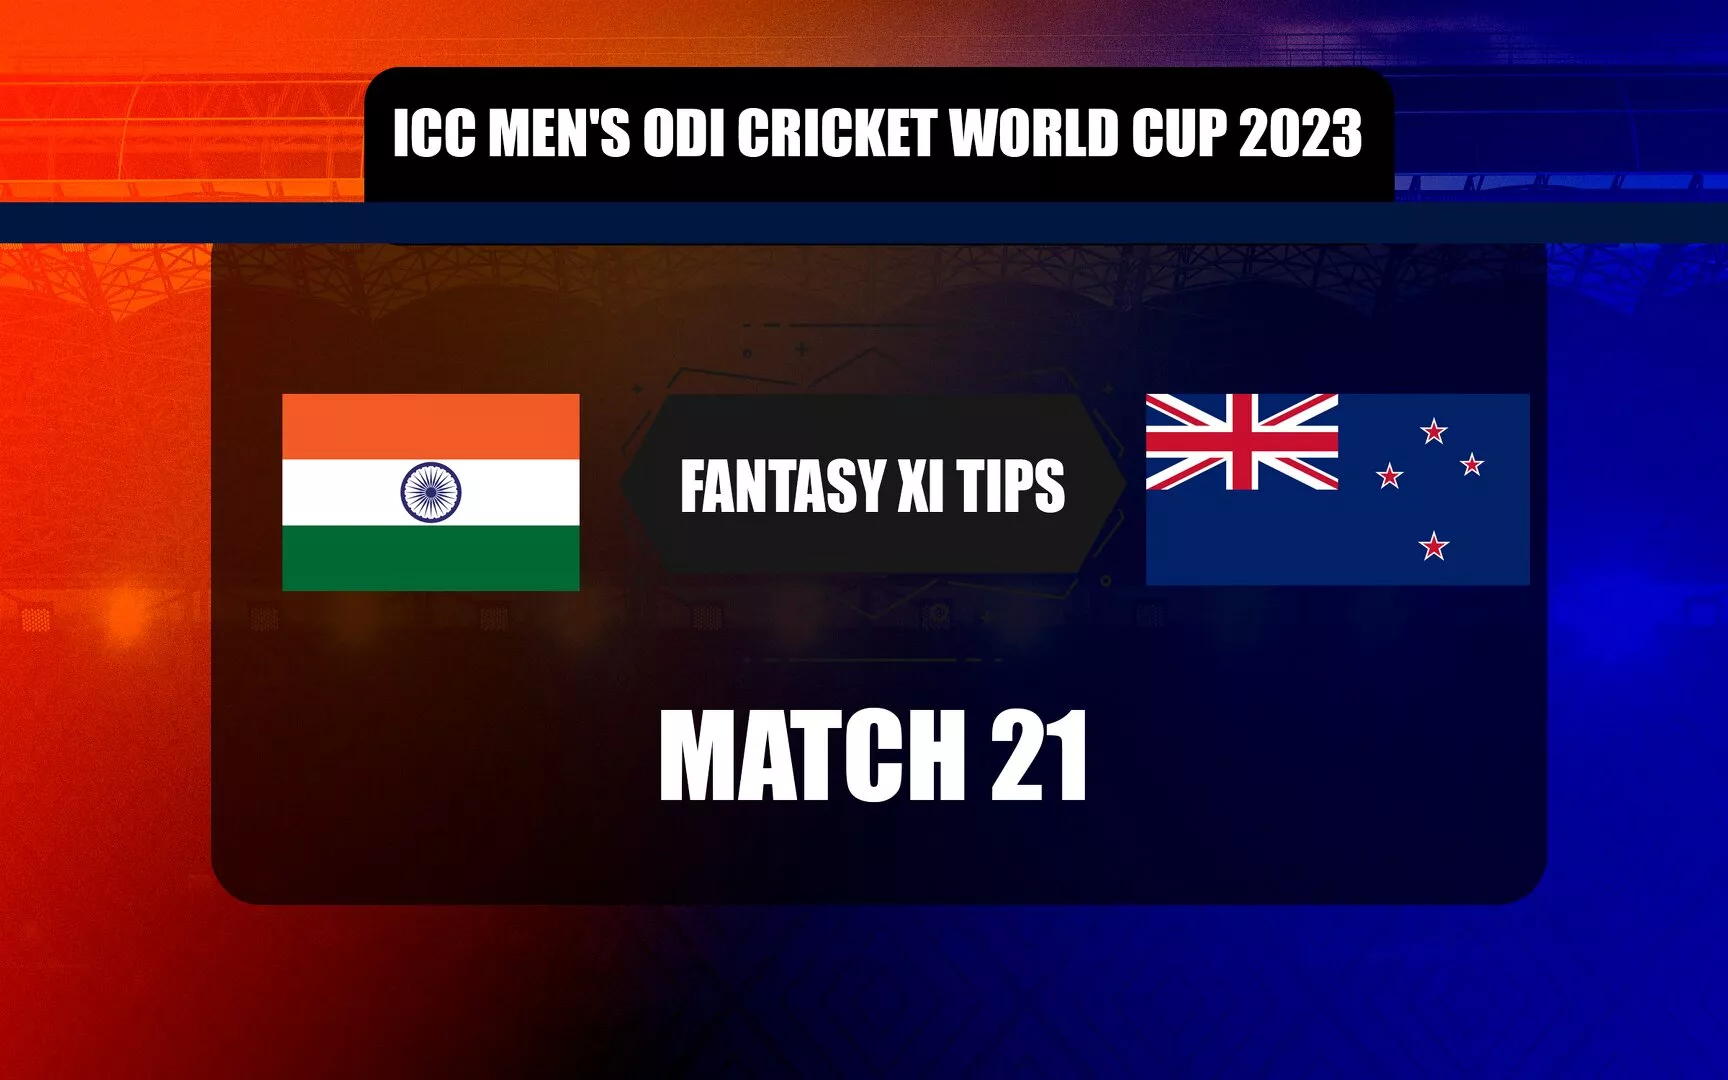 IND vs NZ Dream11 Prediction, Dream11 Playing XI, Today Match 21, ICC Men’s ODI Cricket World Cup 2023